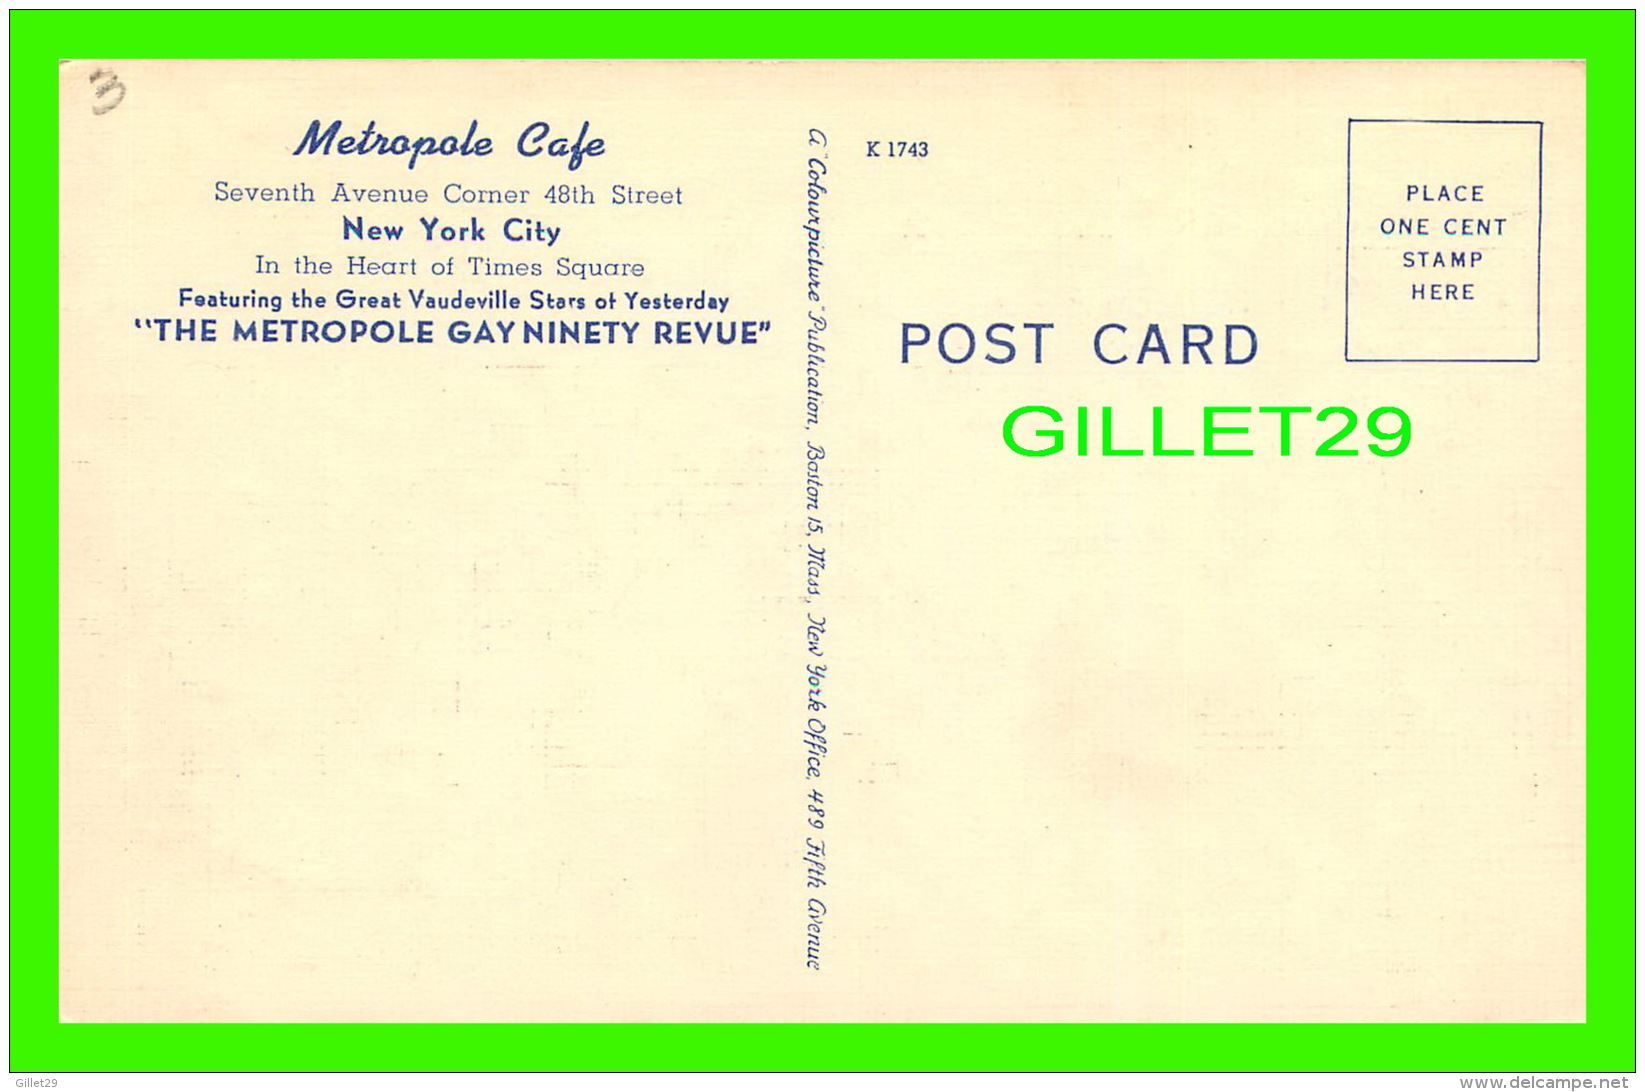 NEW YORK CITY, NY - METROPOLE CAFE - "THE METROPOLE GAY NINETY REVUE" - - Time Square